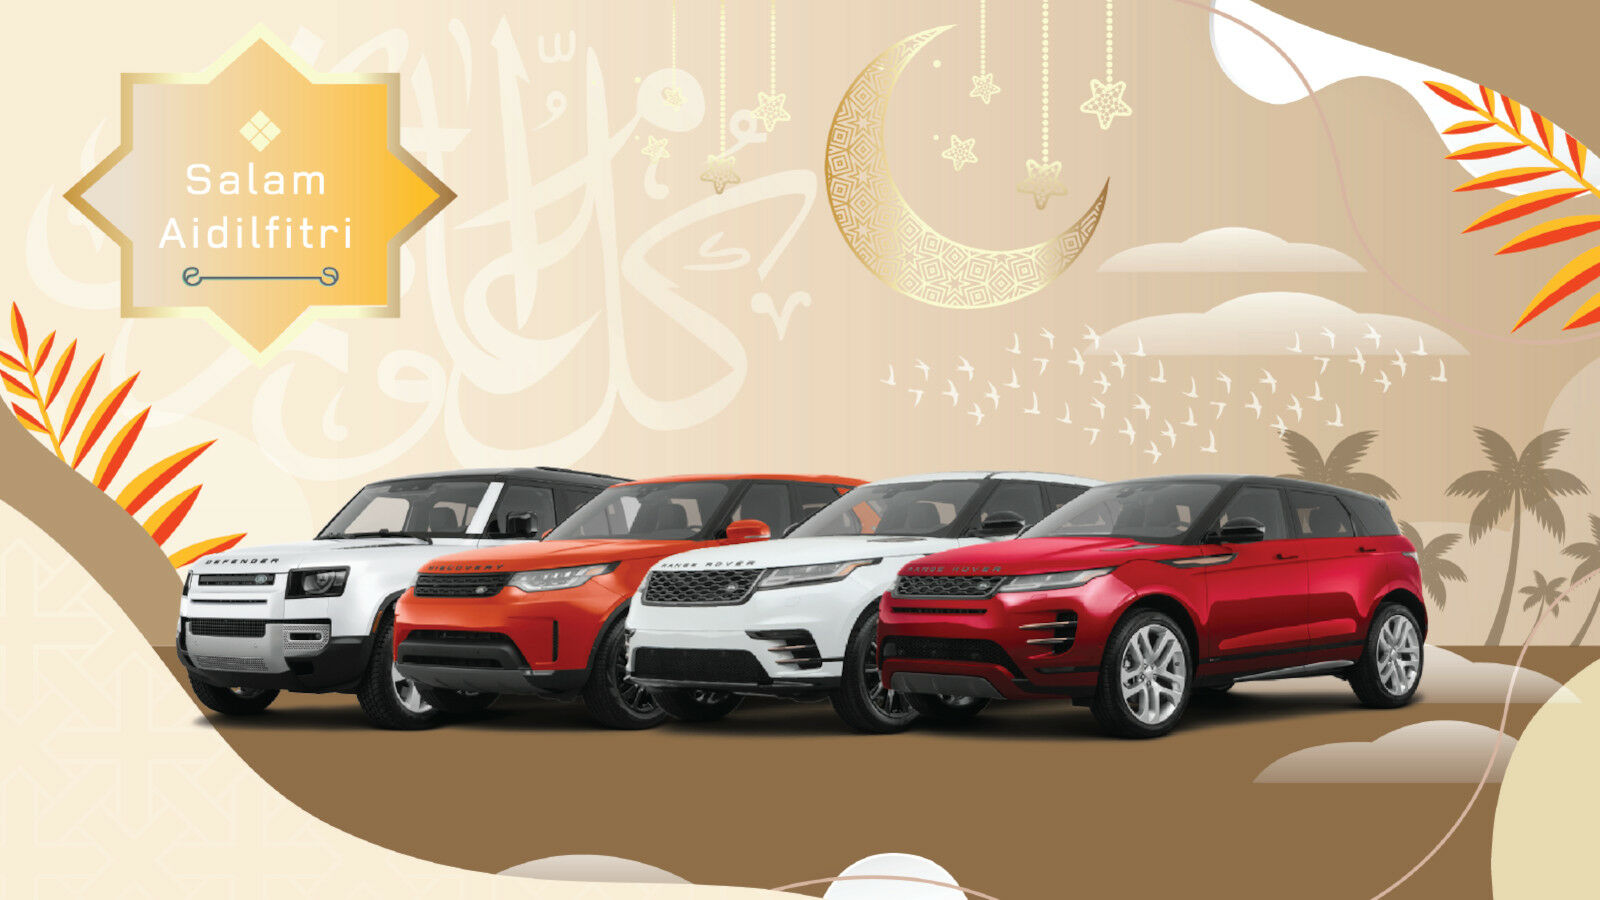 INDERA MOTORS WELCOMES RAMADHAN WITH FESTIVE OFFERS